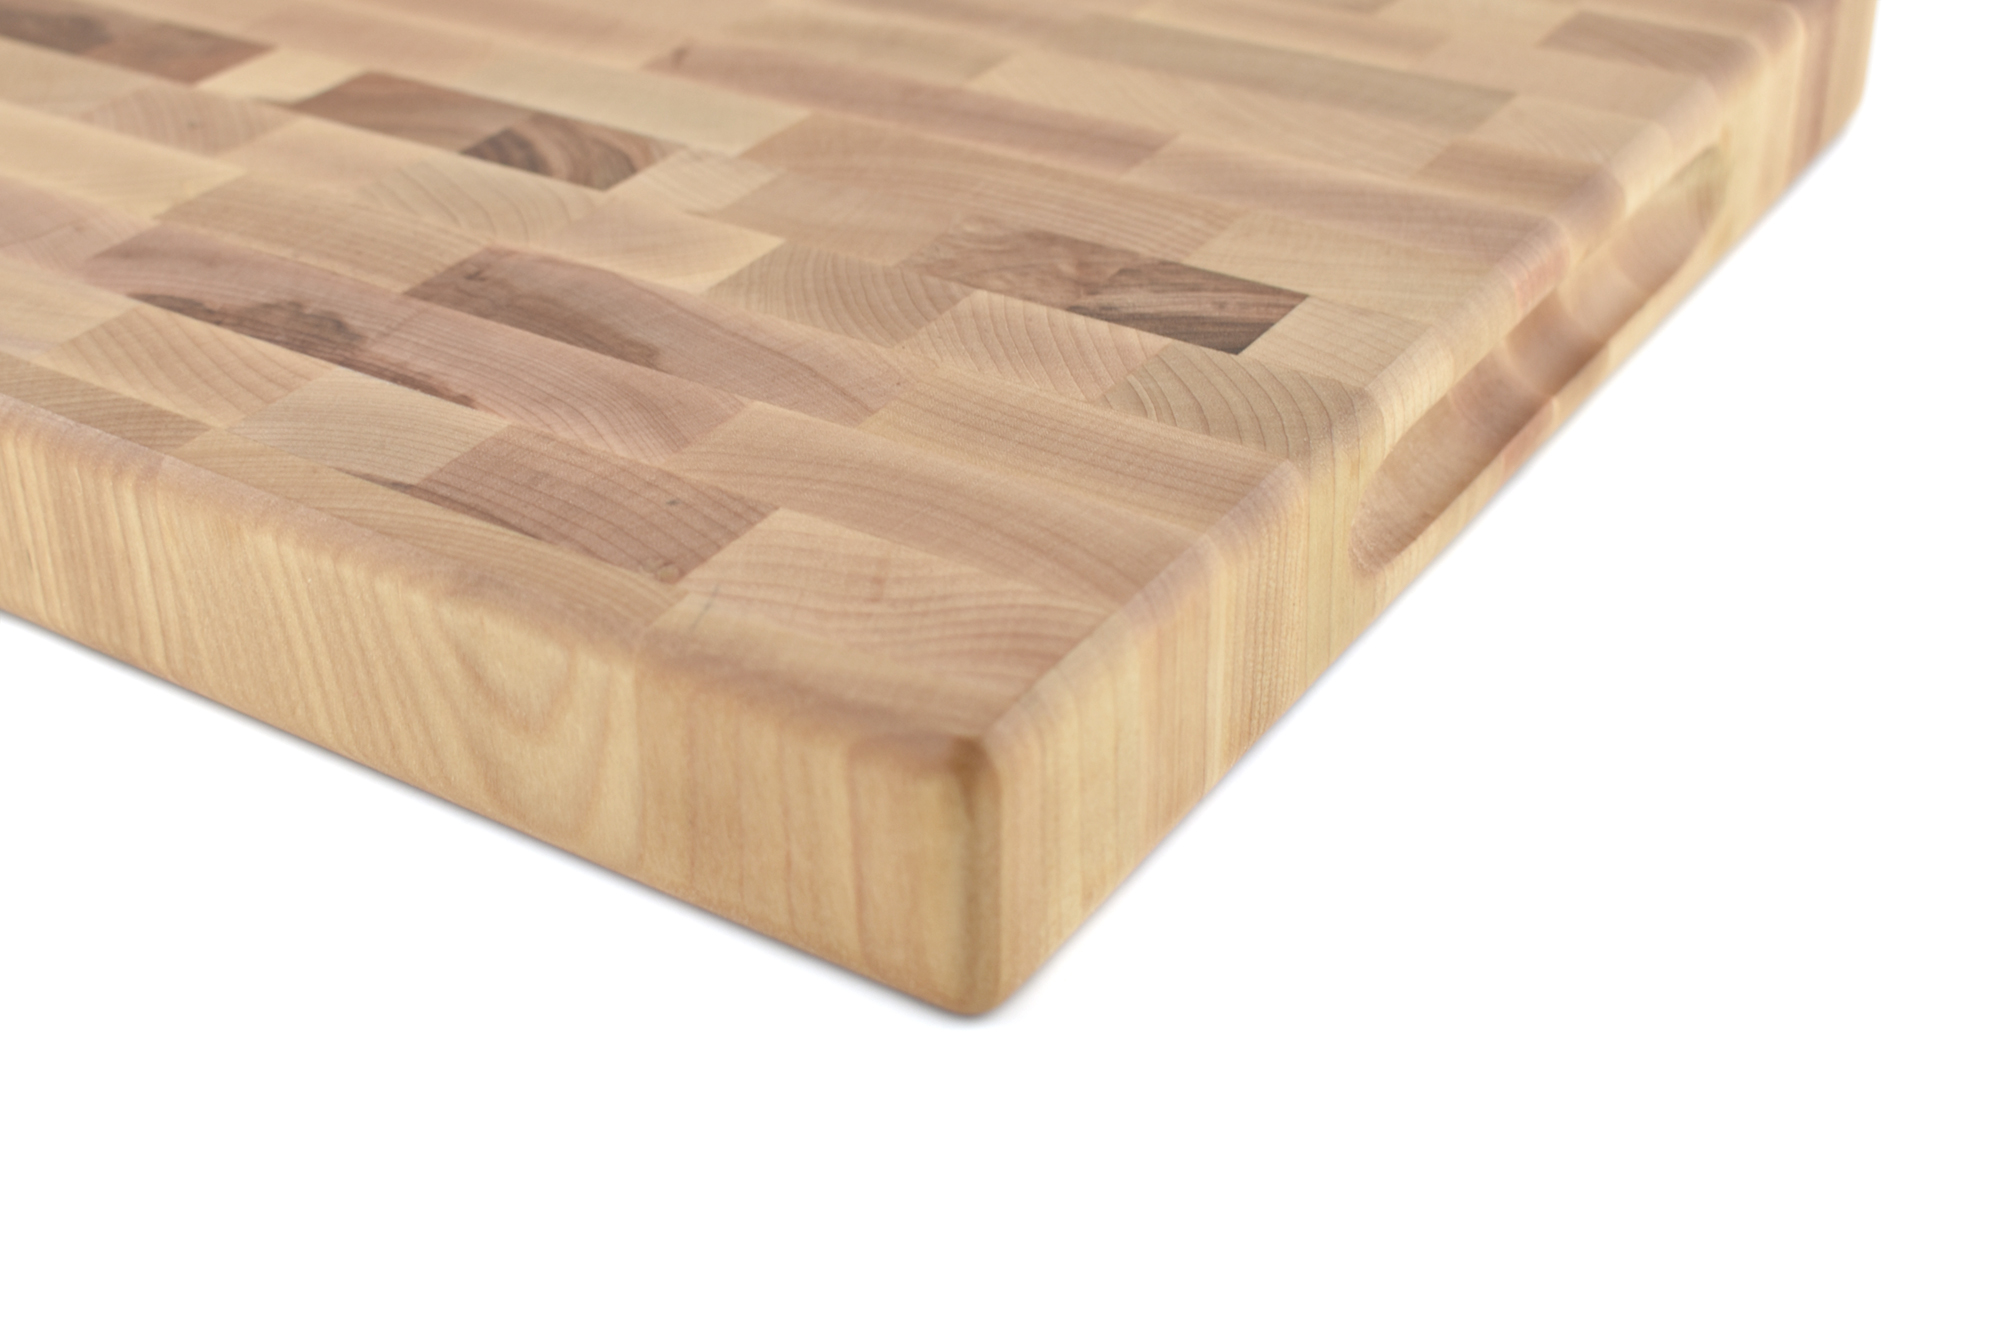 Maple Medium End grain butcher block with side handle indents 